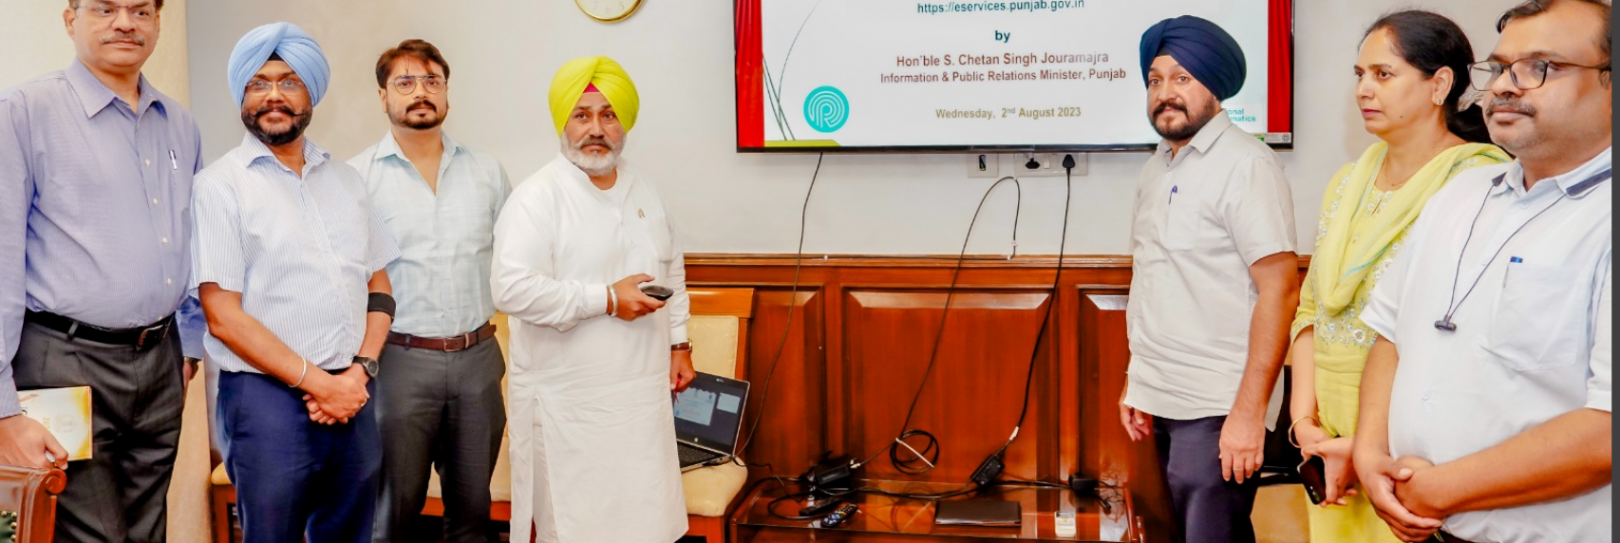 ONLINE PLATFORM LAUNCHED FOR ACCREDITATION TO JOURNALISTS IN PUNJAB